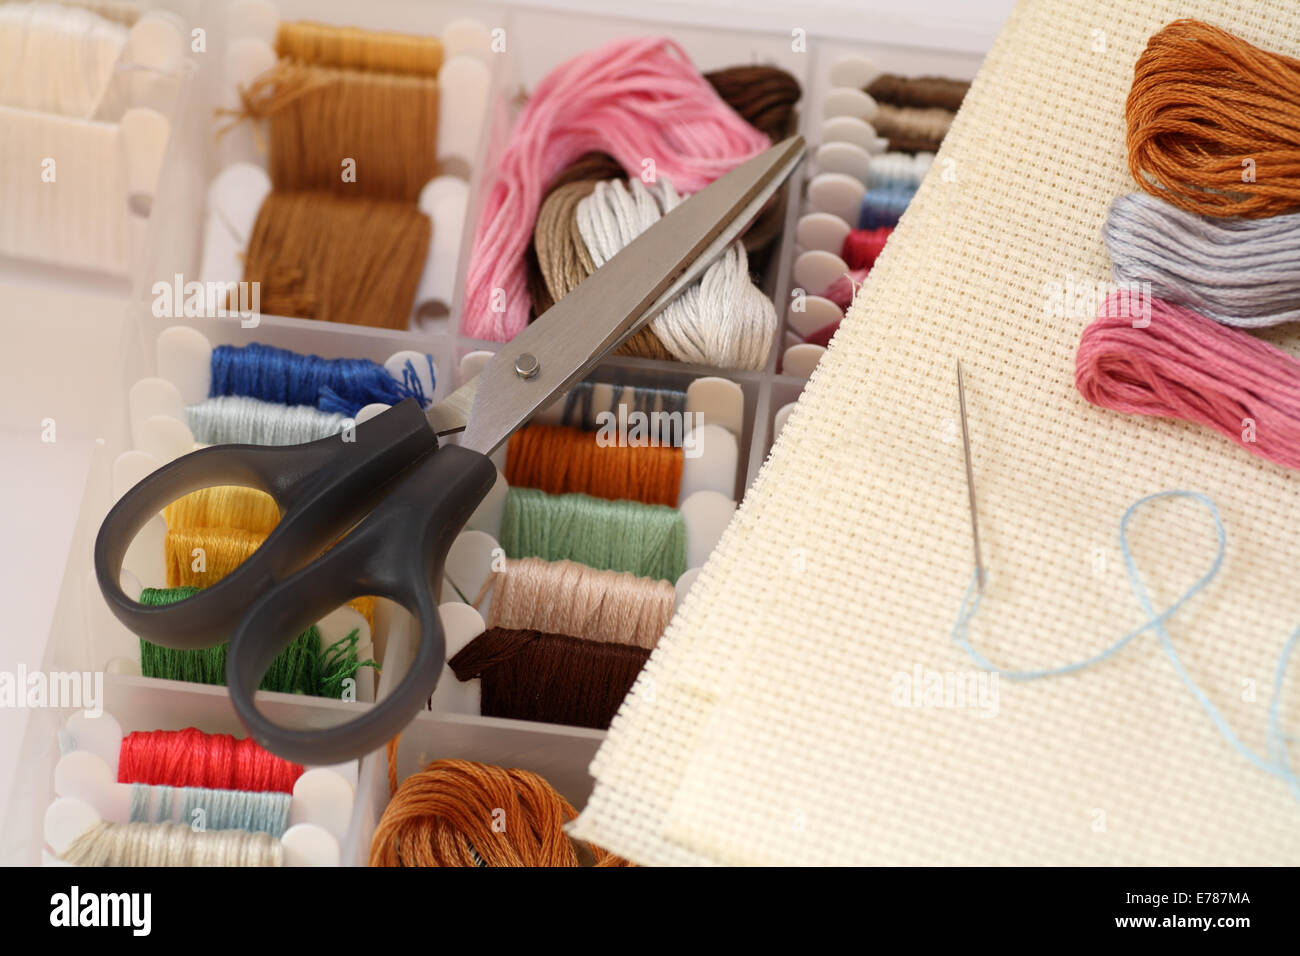 Preparations for embroidery (Cross-Stitch). Close-up Stock Photo